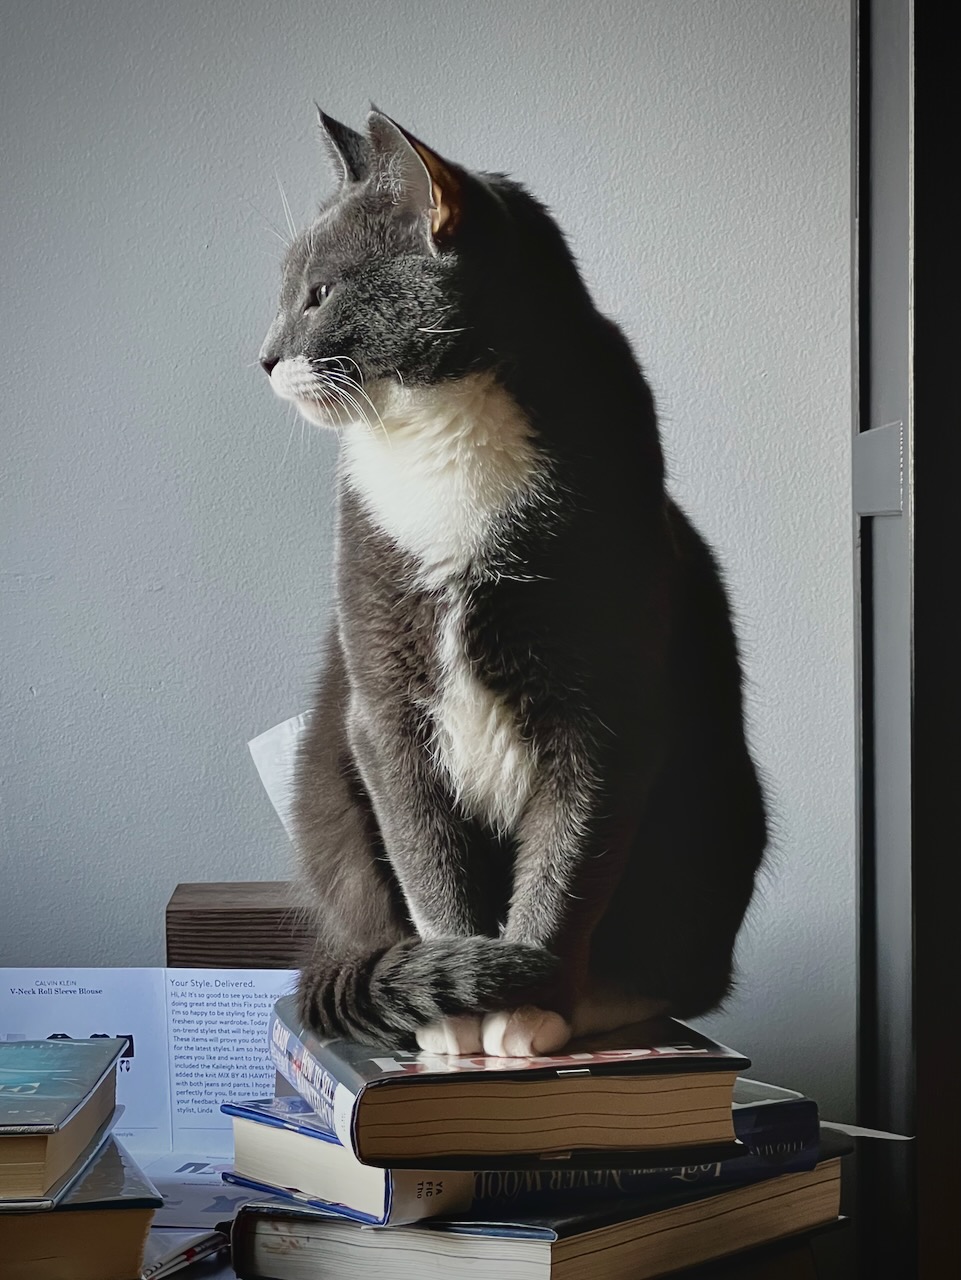 Our cat, Sanya, sitting on a stack of books